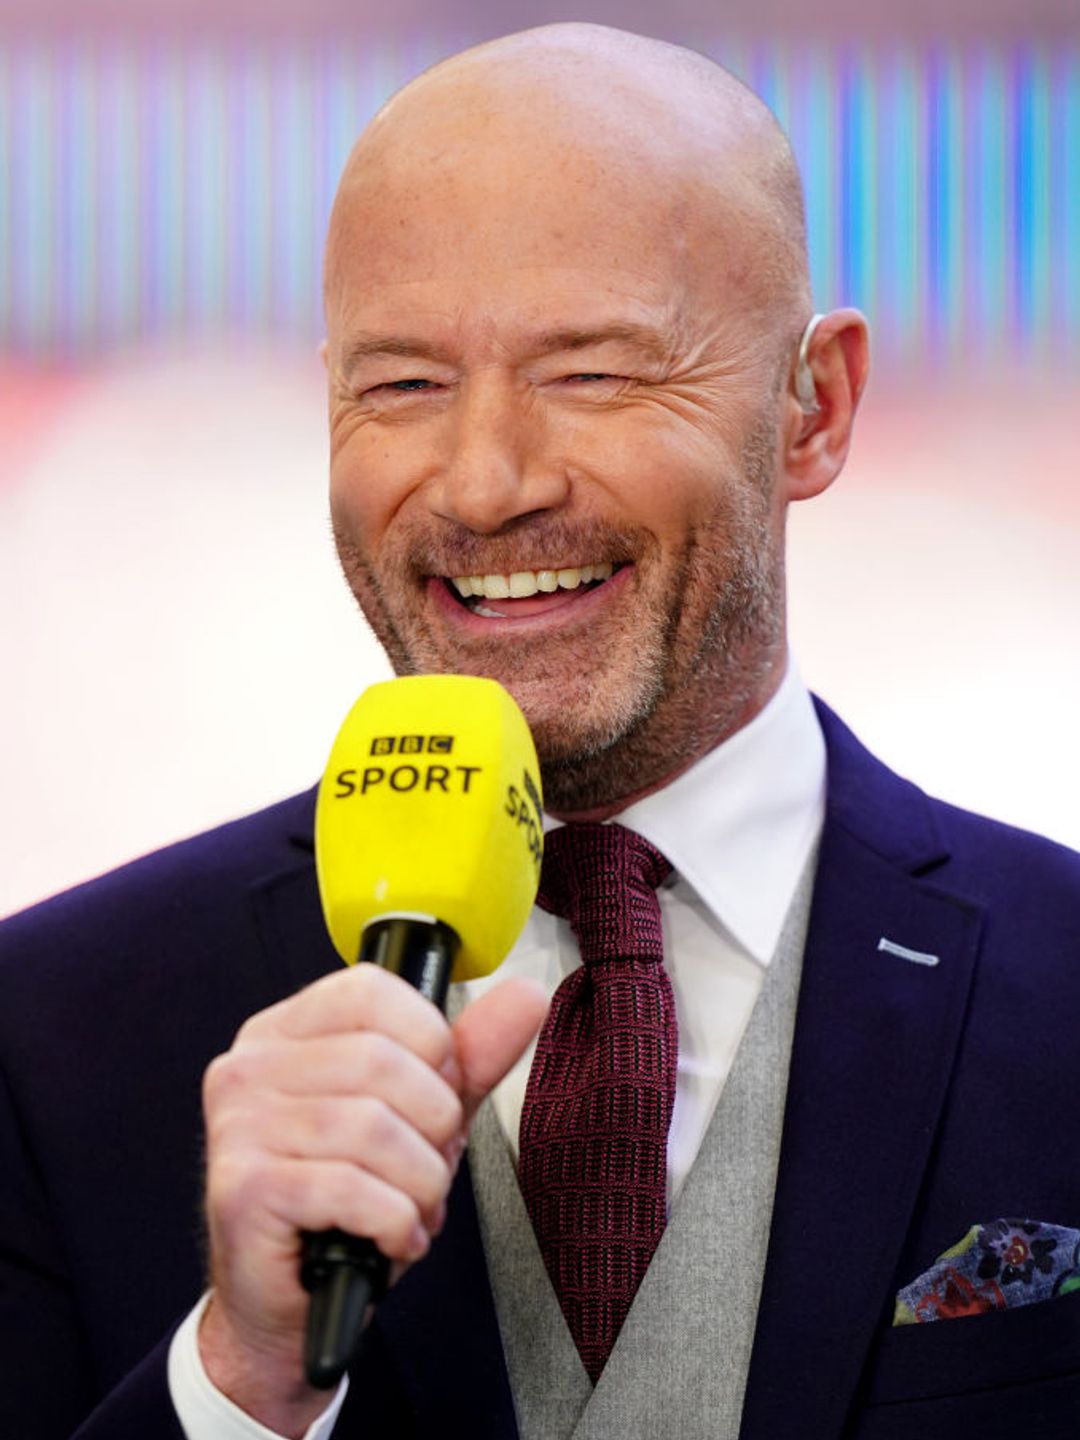 Alan Shearer introduced for BBC Sports 